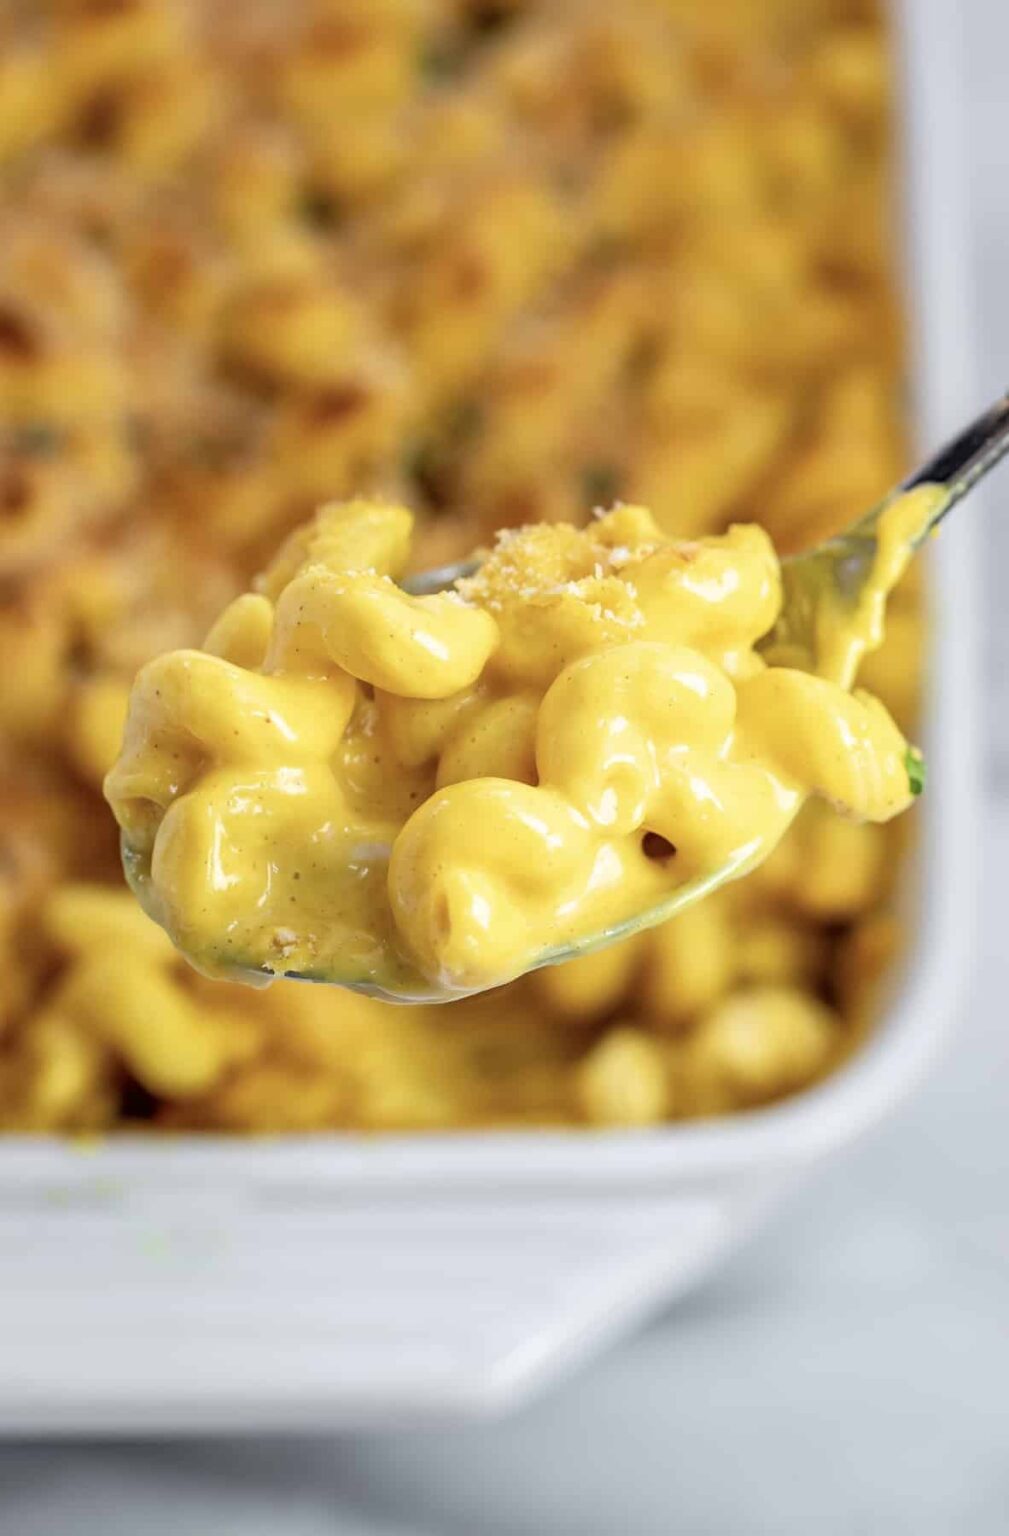 Baked Vegan Mac and Cheese - Eat With Clarity